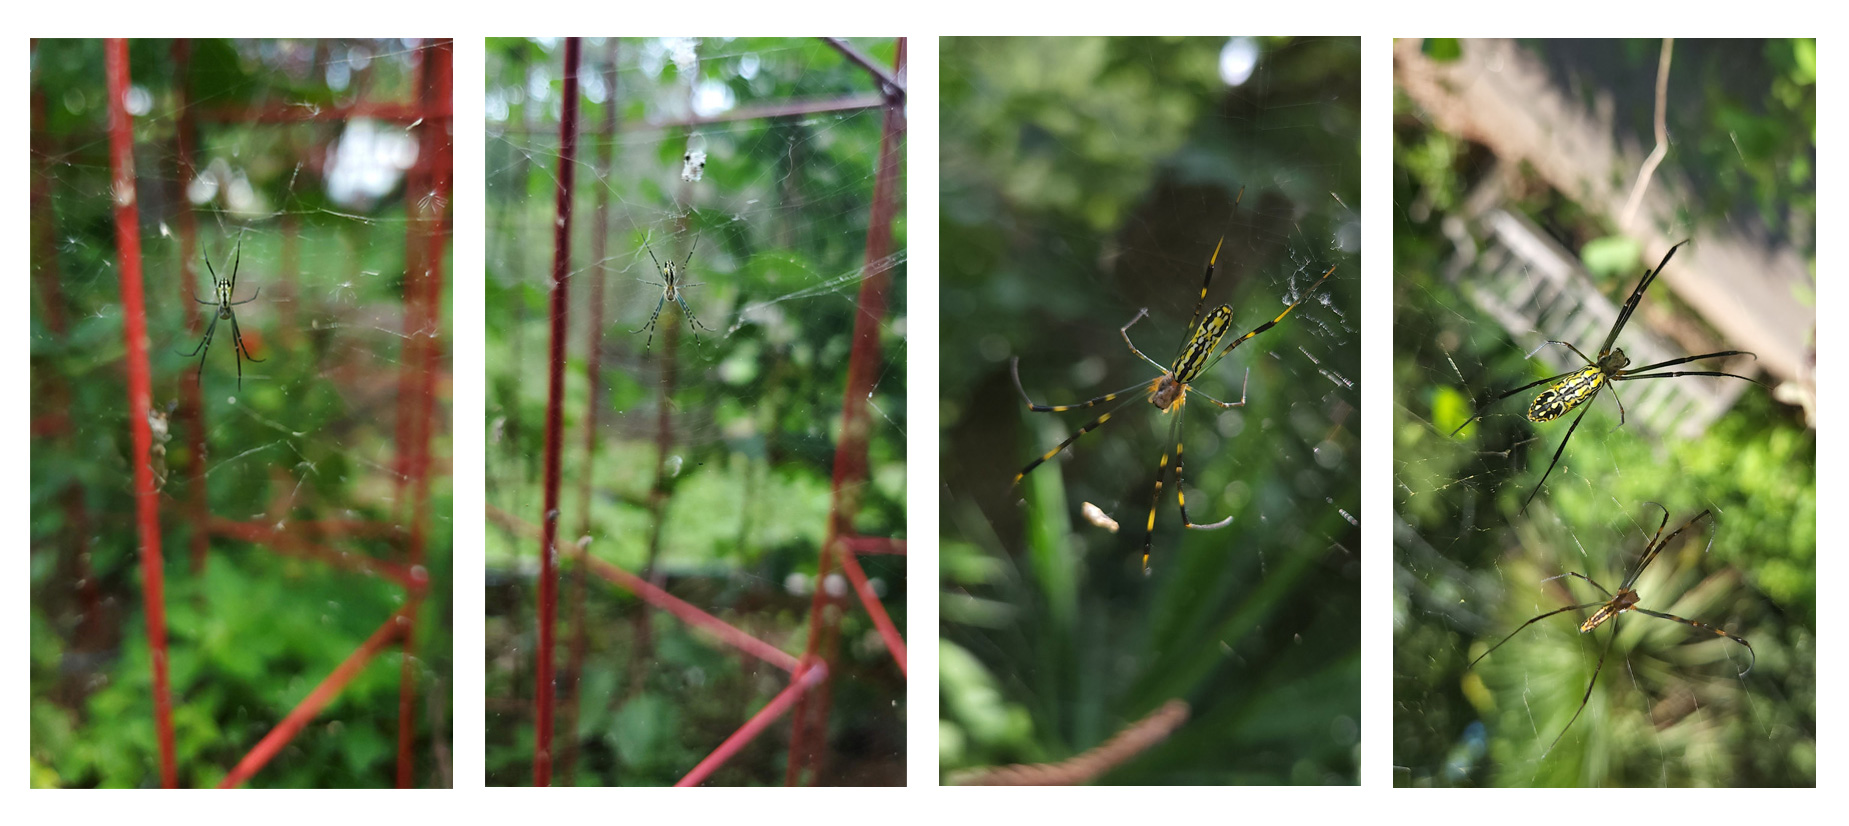 Images left to right show immature Joro spiders progressing through monthly stages of growth in size